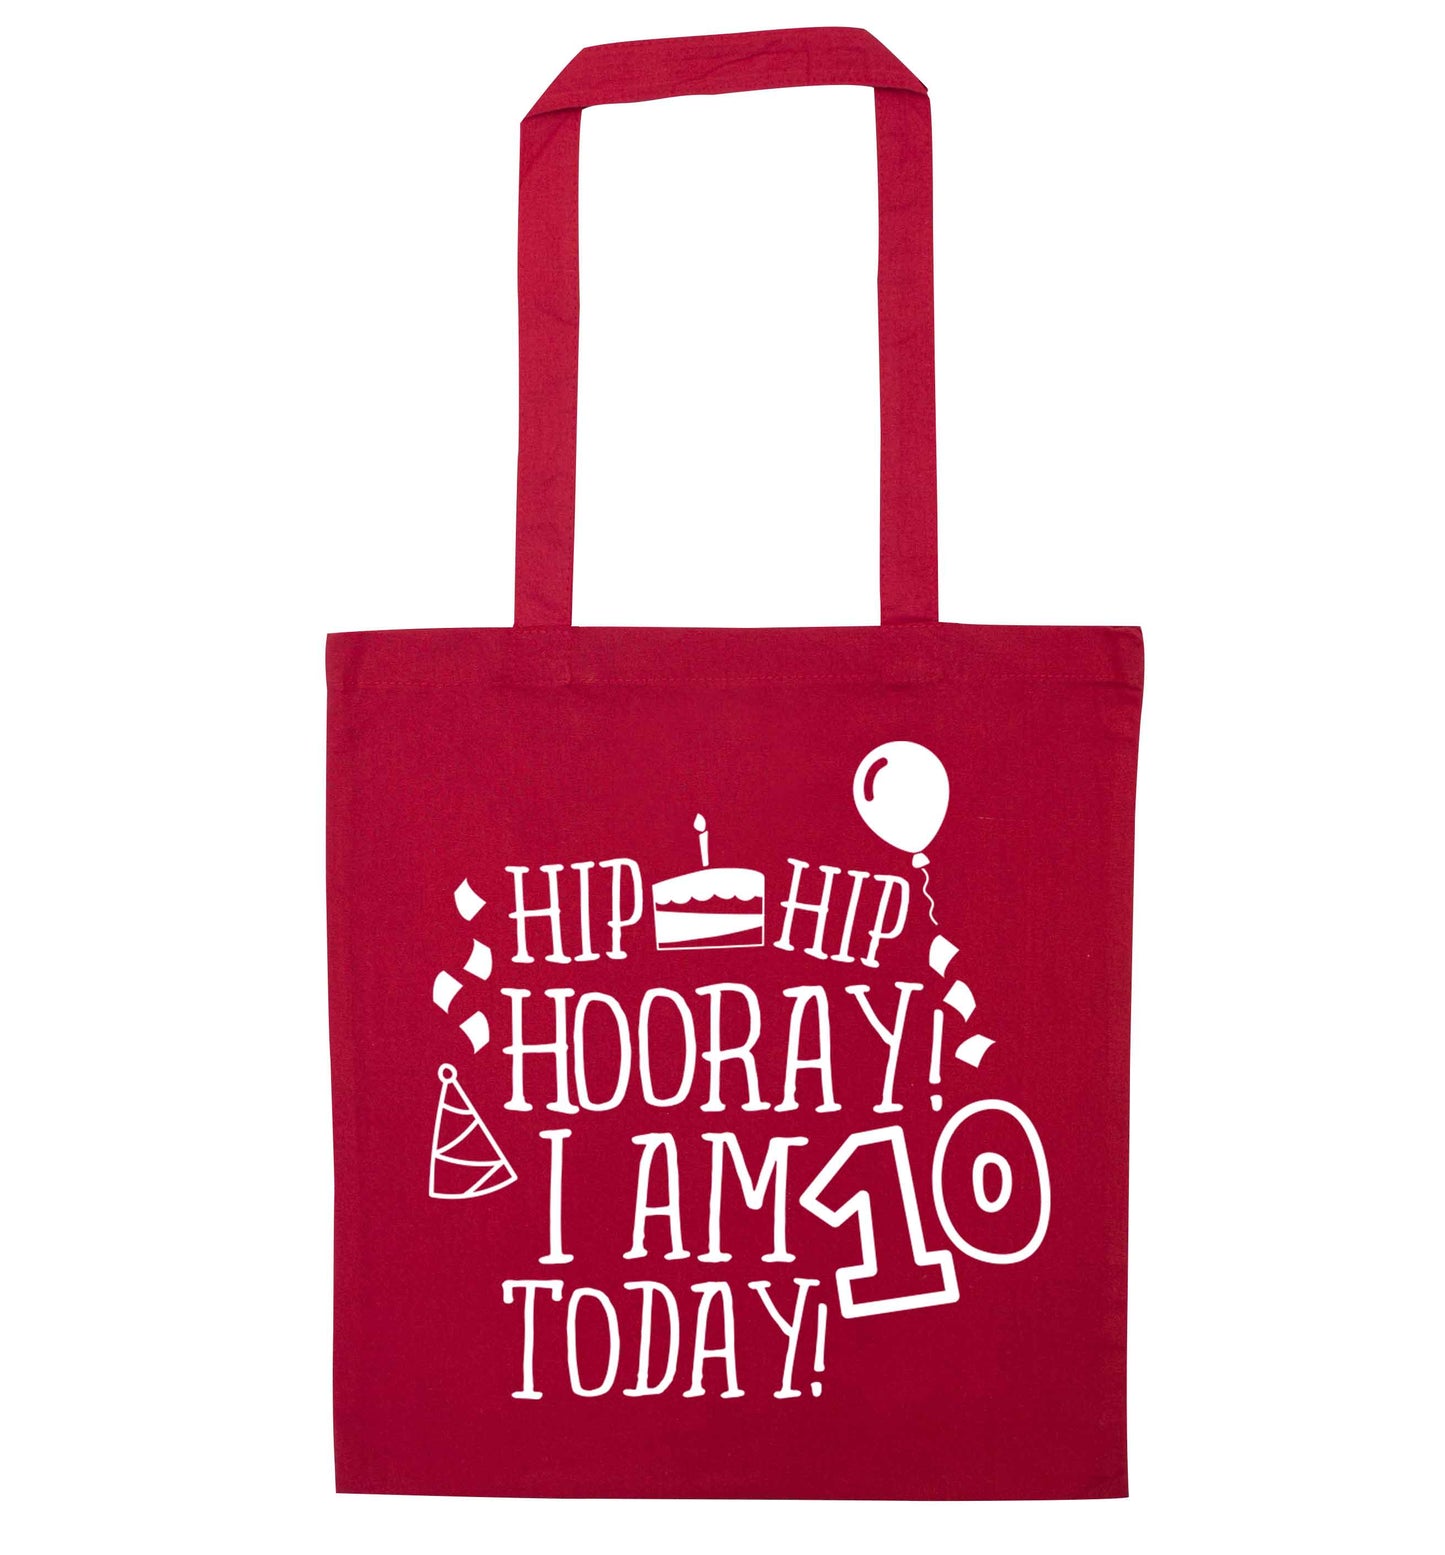 Hip hip hooray I am ten today! red tote bag